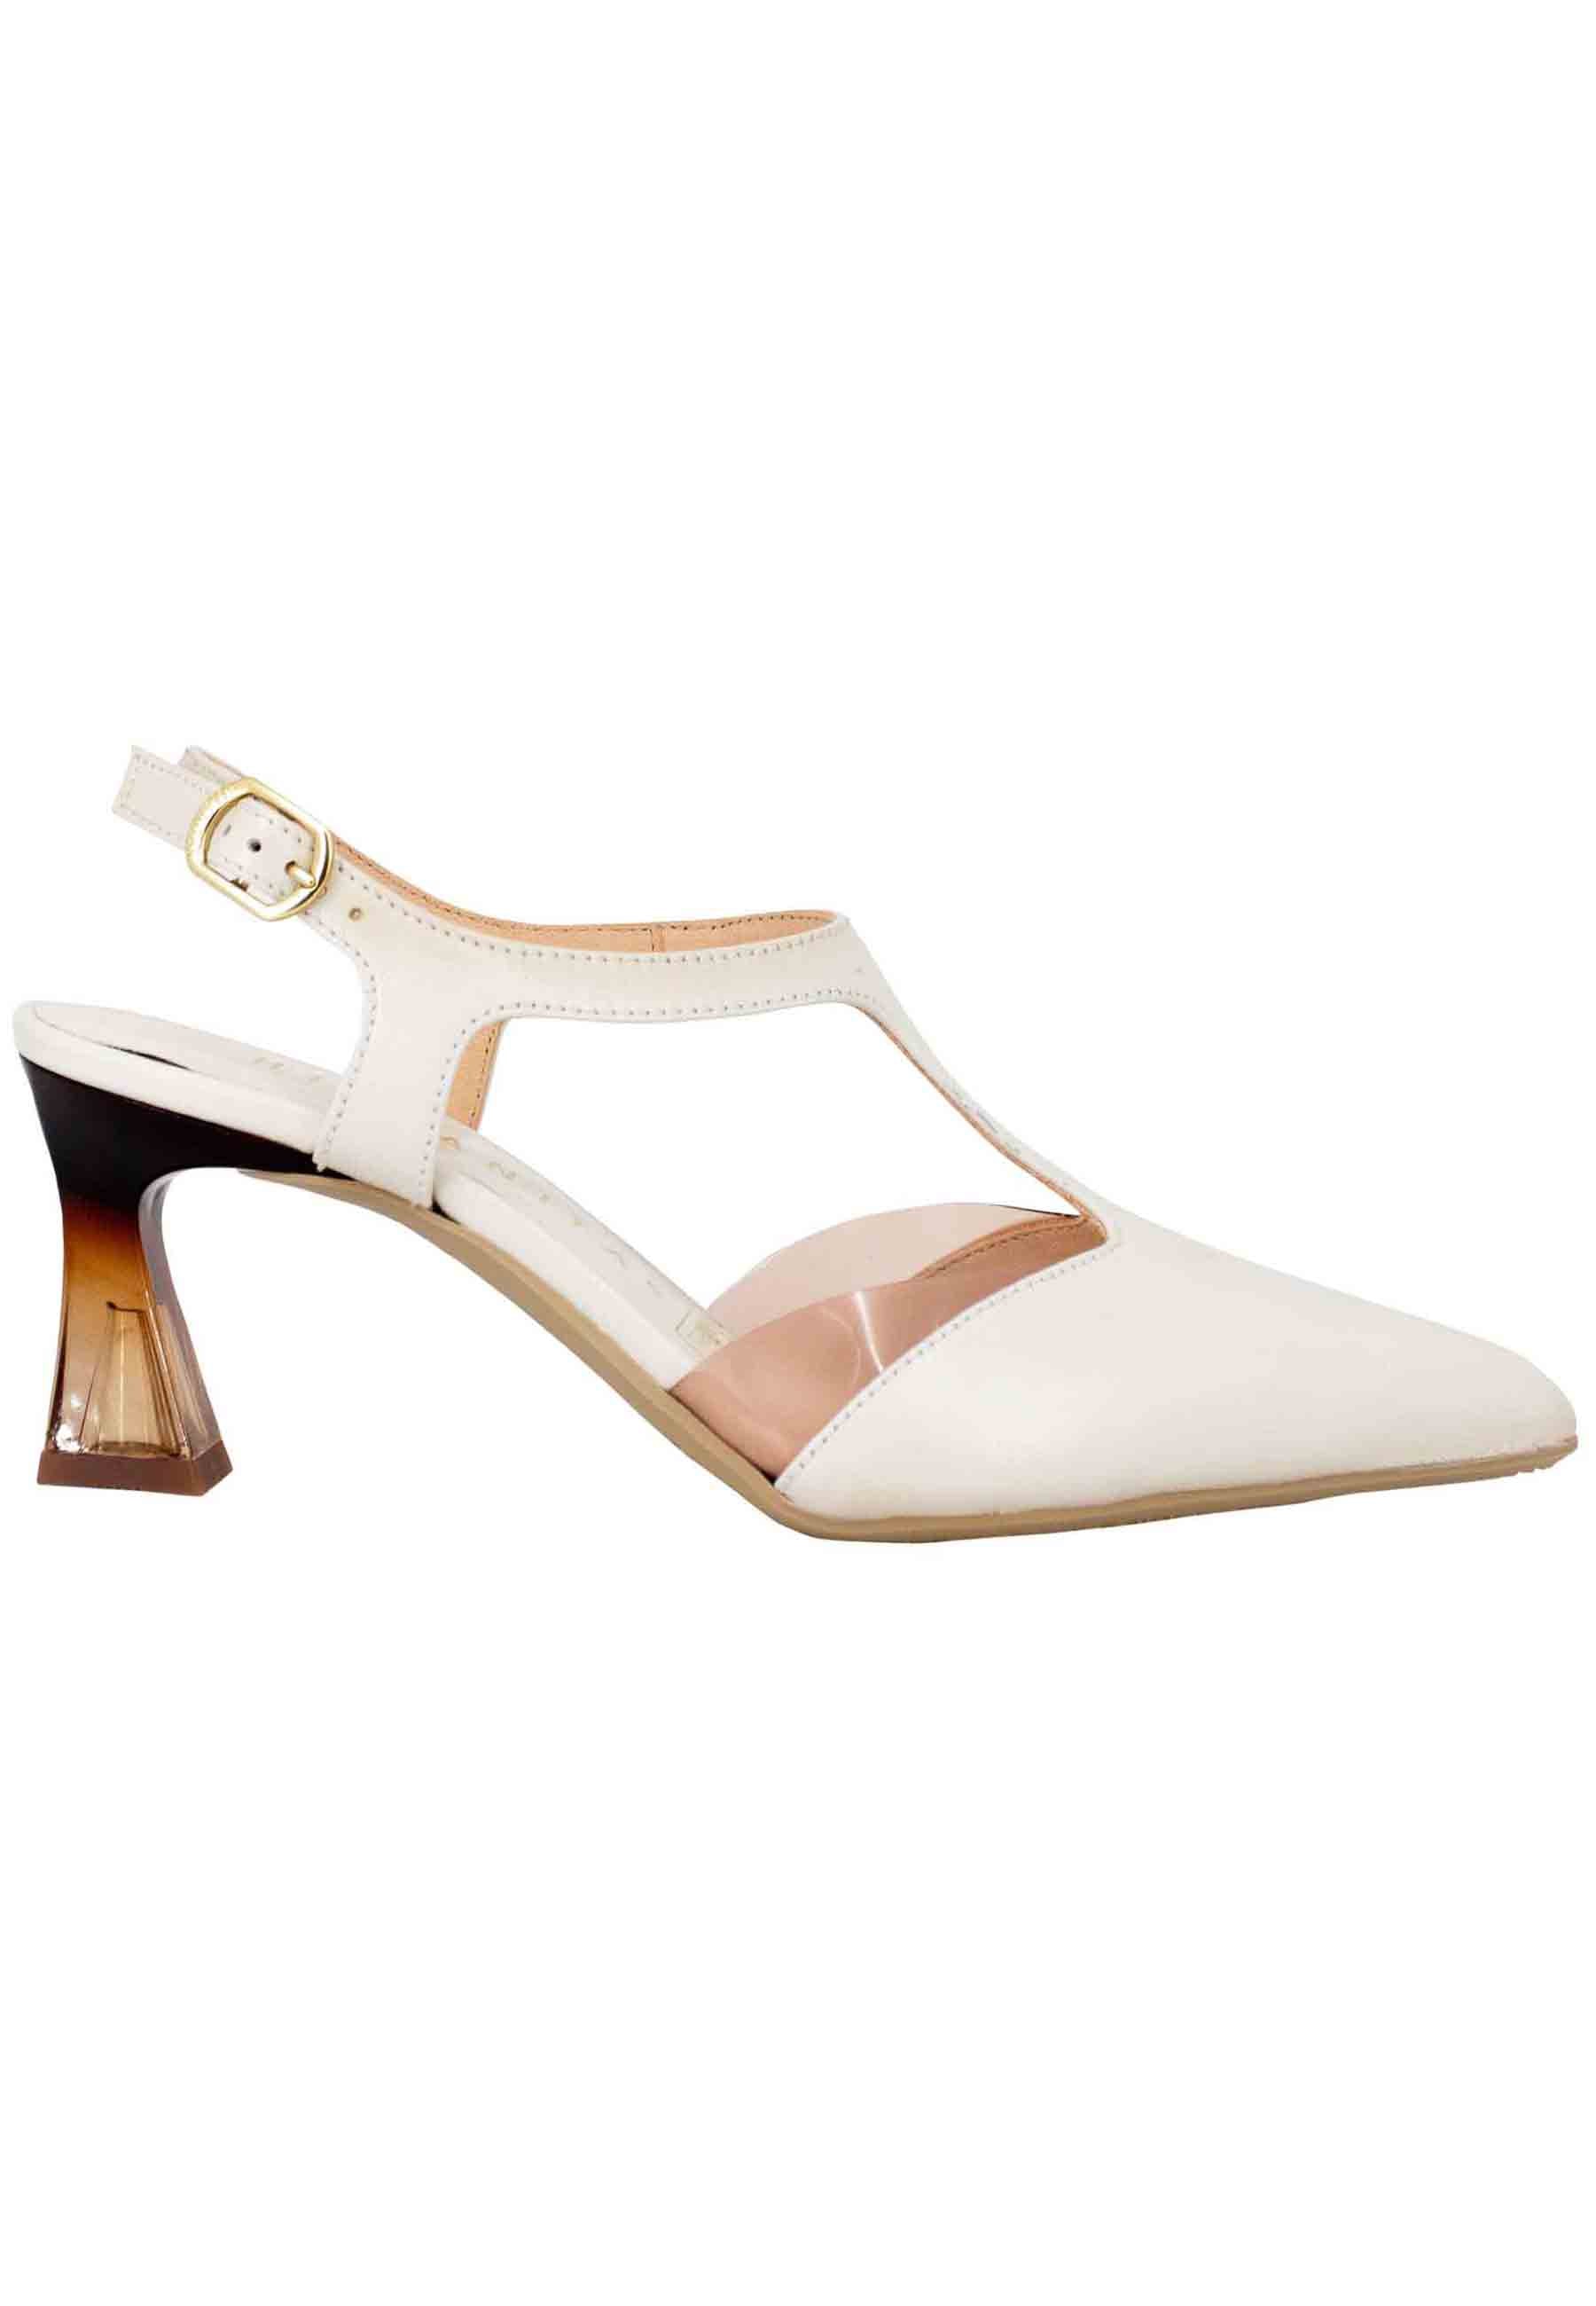 Dalia women's slingback pumps in beige leather with smoked heel